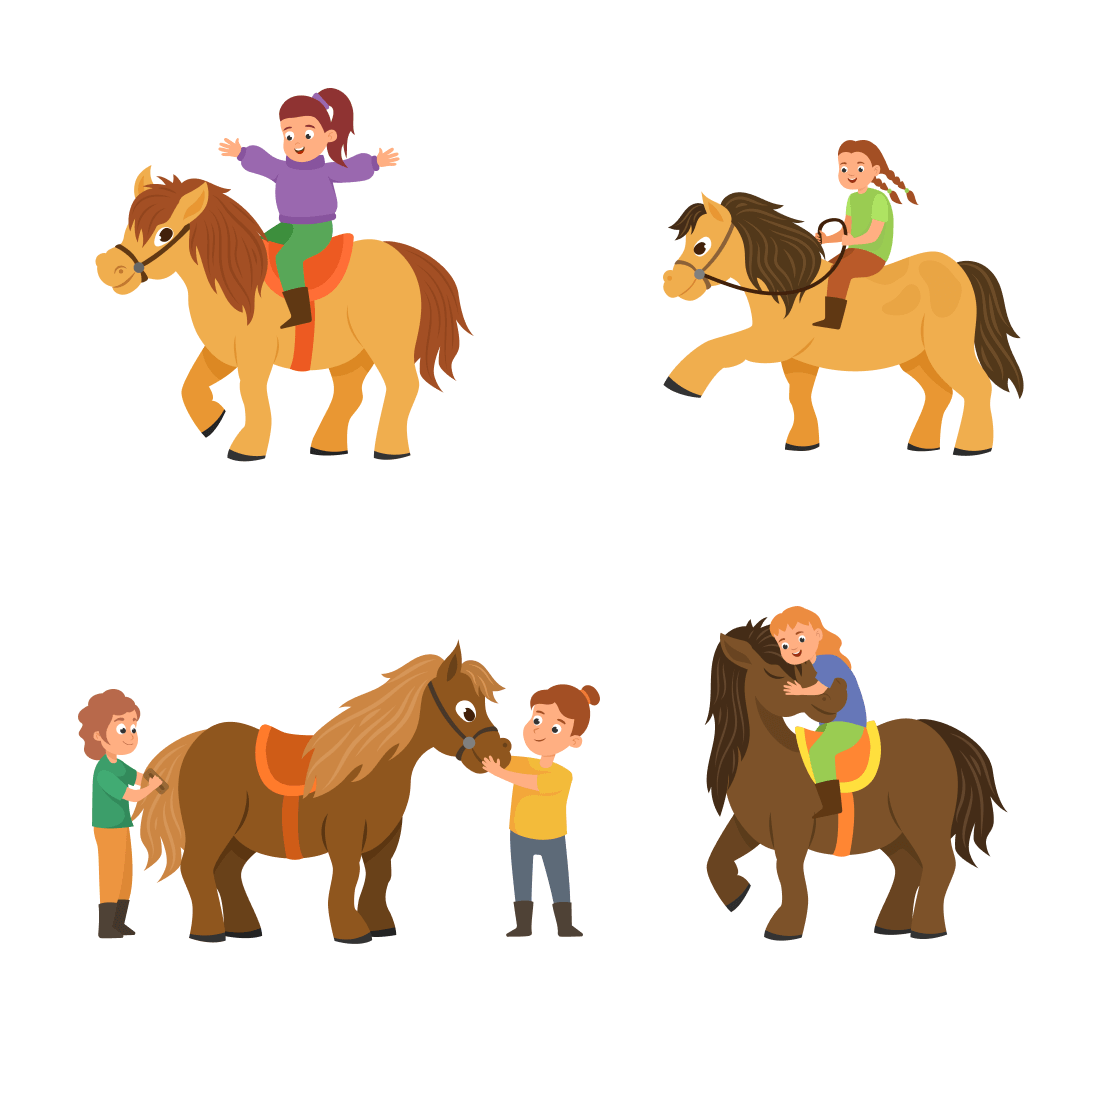 Couple of kids riding on the backs of horses.